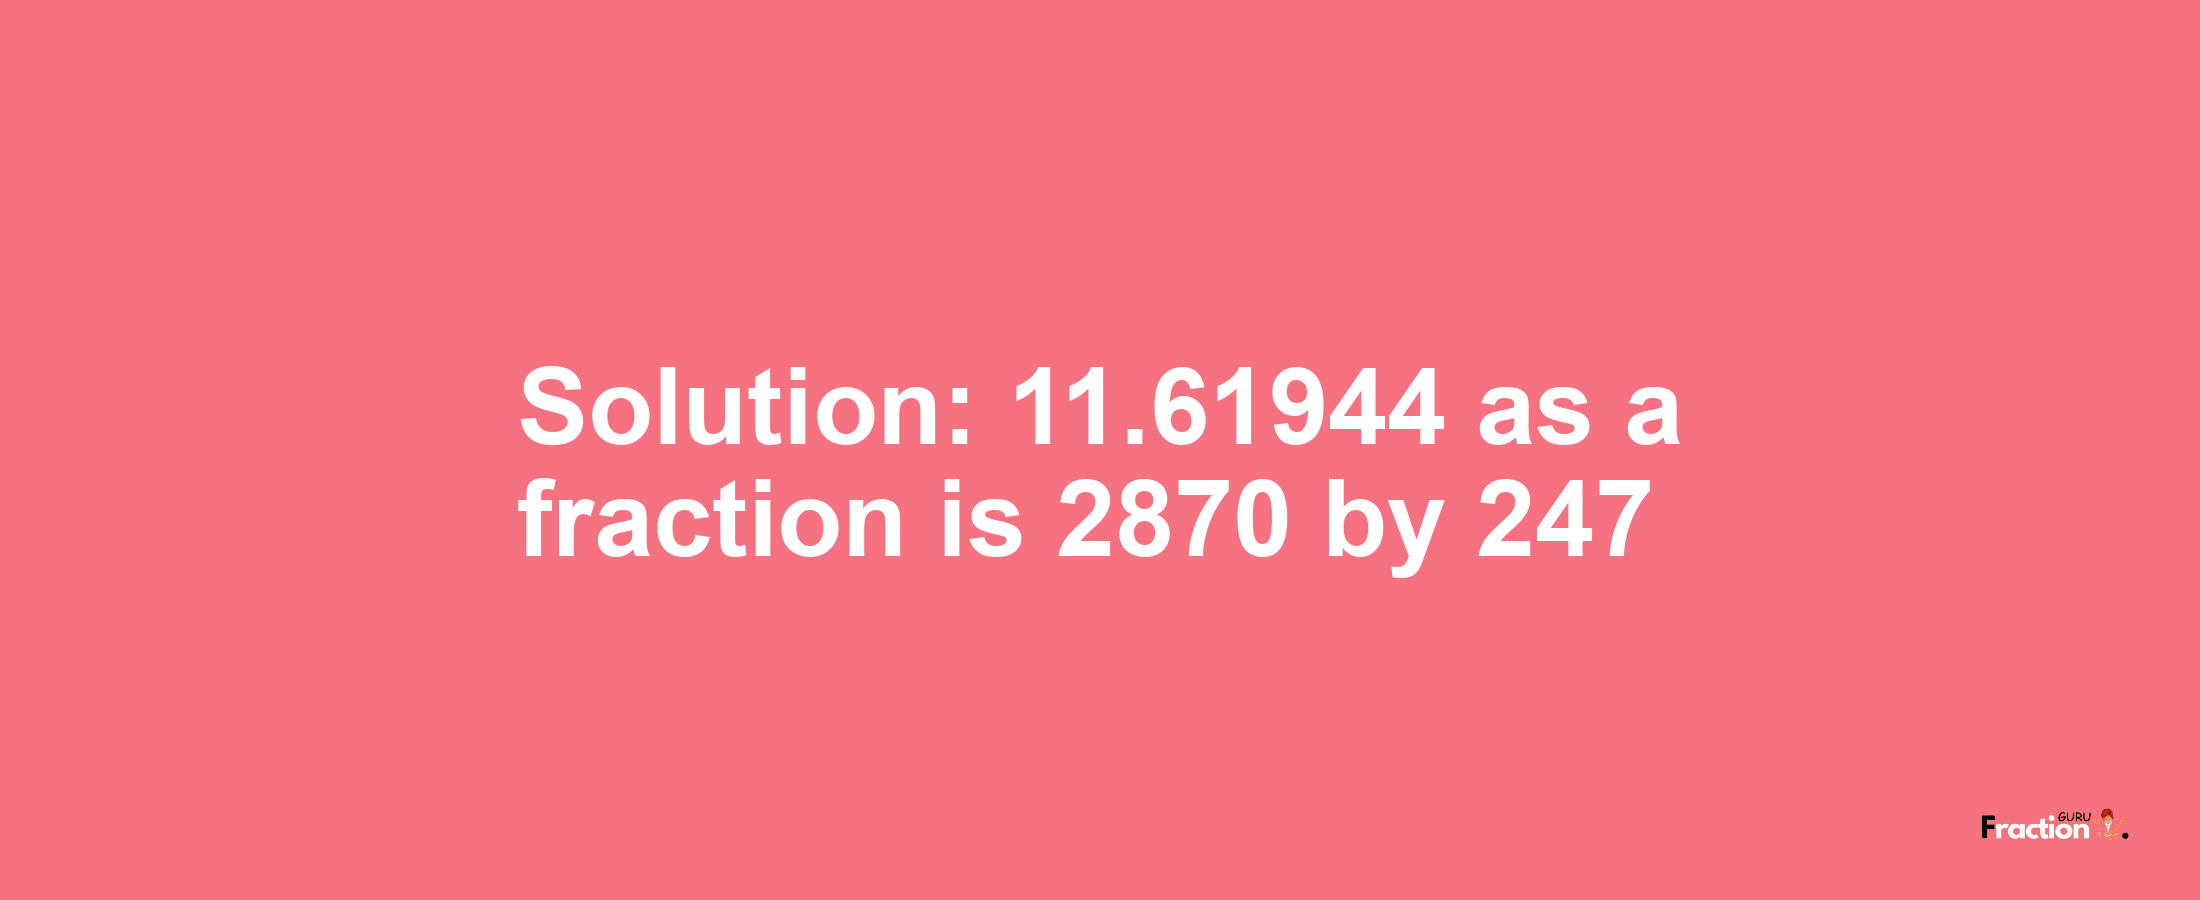 Solution:11.61944 as a fraction is 2870/247